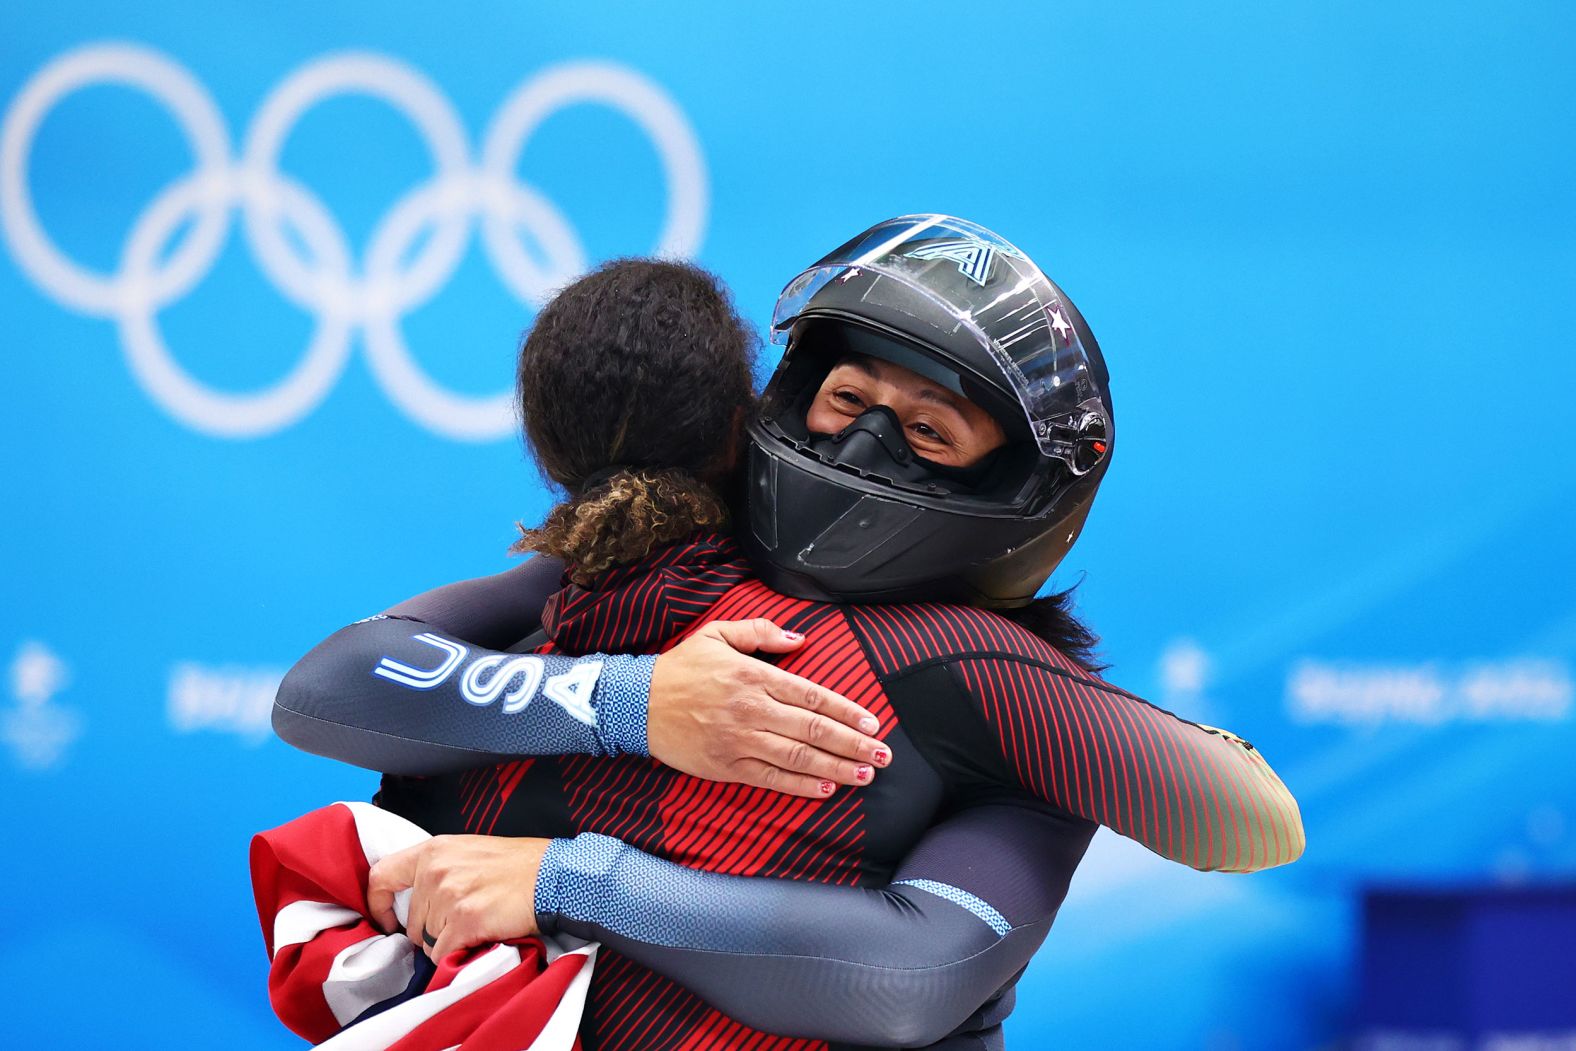 Americans Elana Meyers Taylor and Sylvia Hoffman celebrate after winning bronze in the two-woman bobsled event on February 19. It was Meyers Taylor's fifth Olympic medal, making her <a href="index.php?page=&url=https%3A%2F%2Fwww.cnn.com%2F2022%2F02%2F19%2Fsport%2Felana-meyers-taylor-most-decorated-black-athlete-winter-olympics-history-spt-intl%2Findex.html" target="_blank">the most decorated Black athlete in Winter Olympics history.</a>